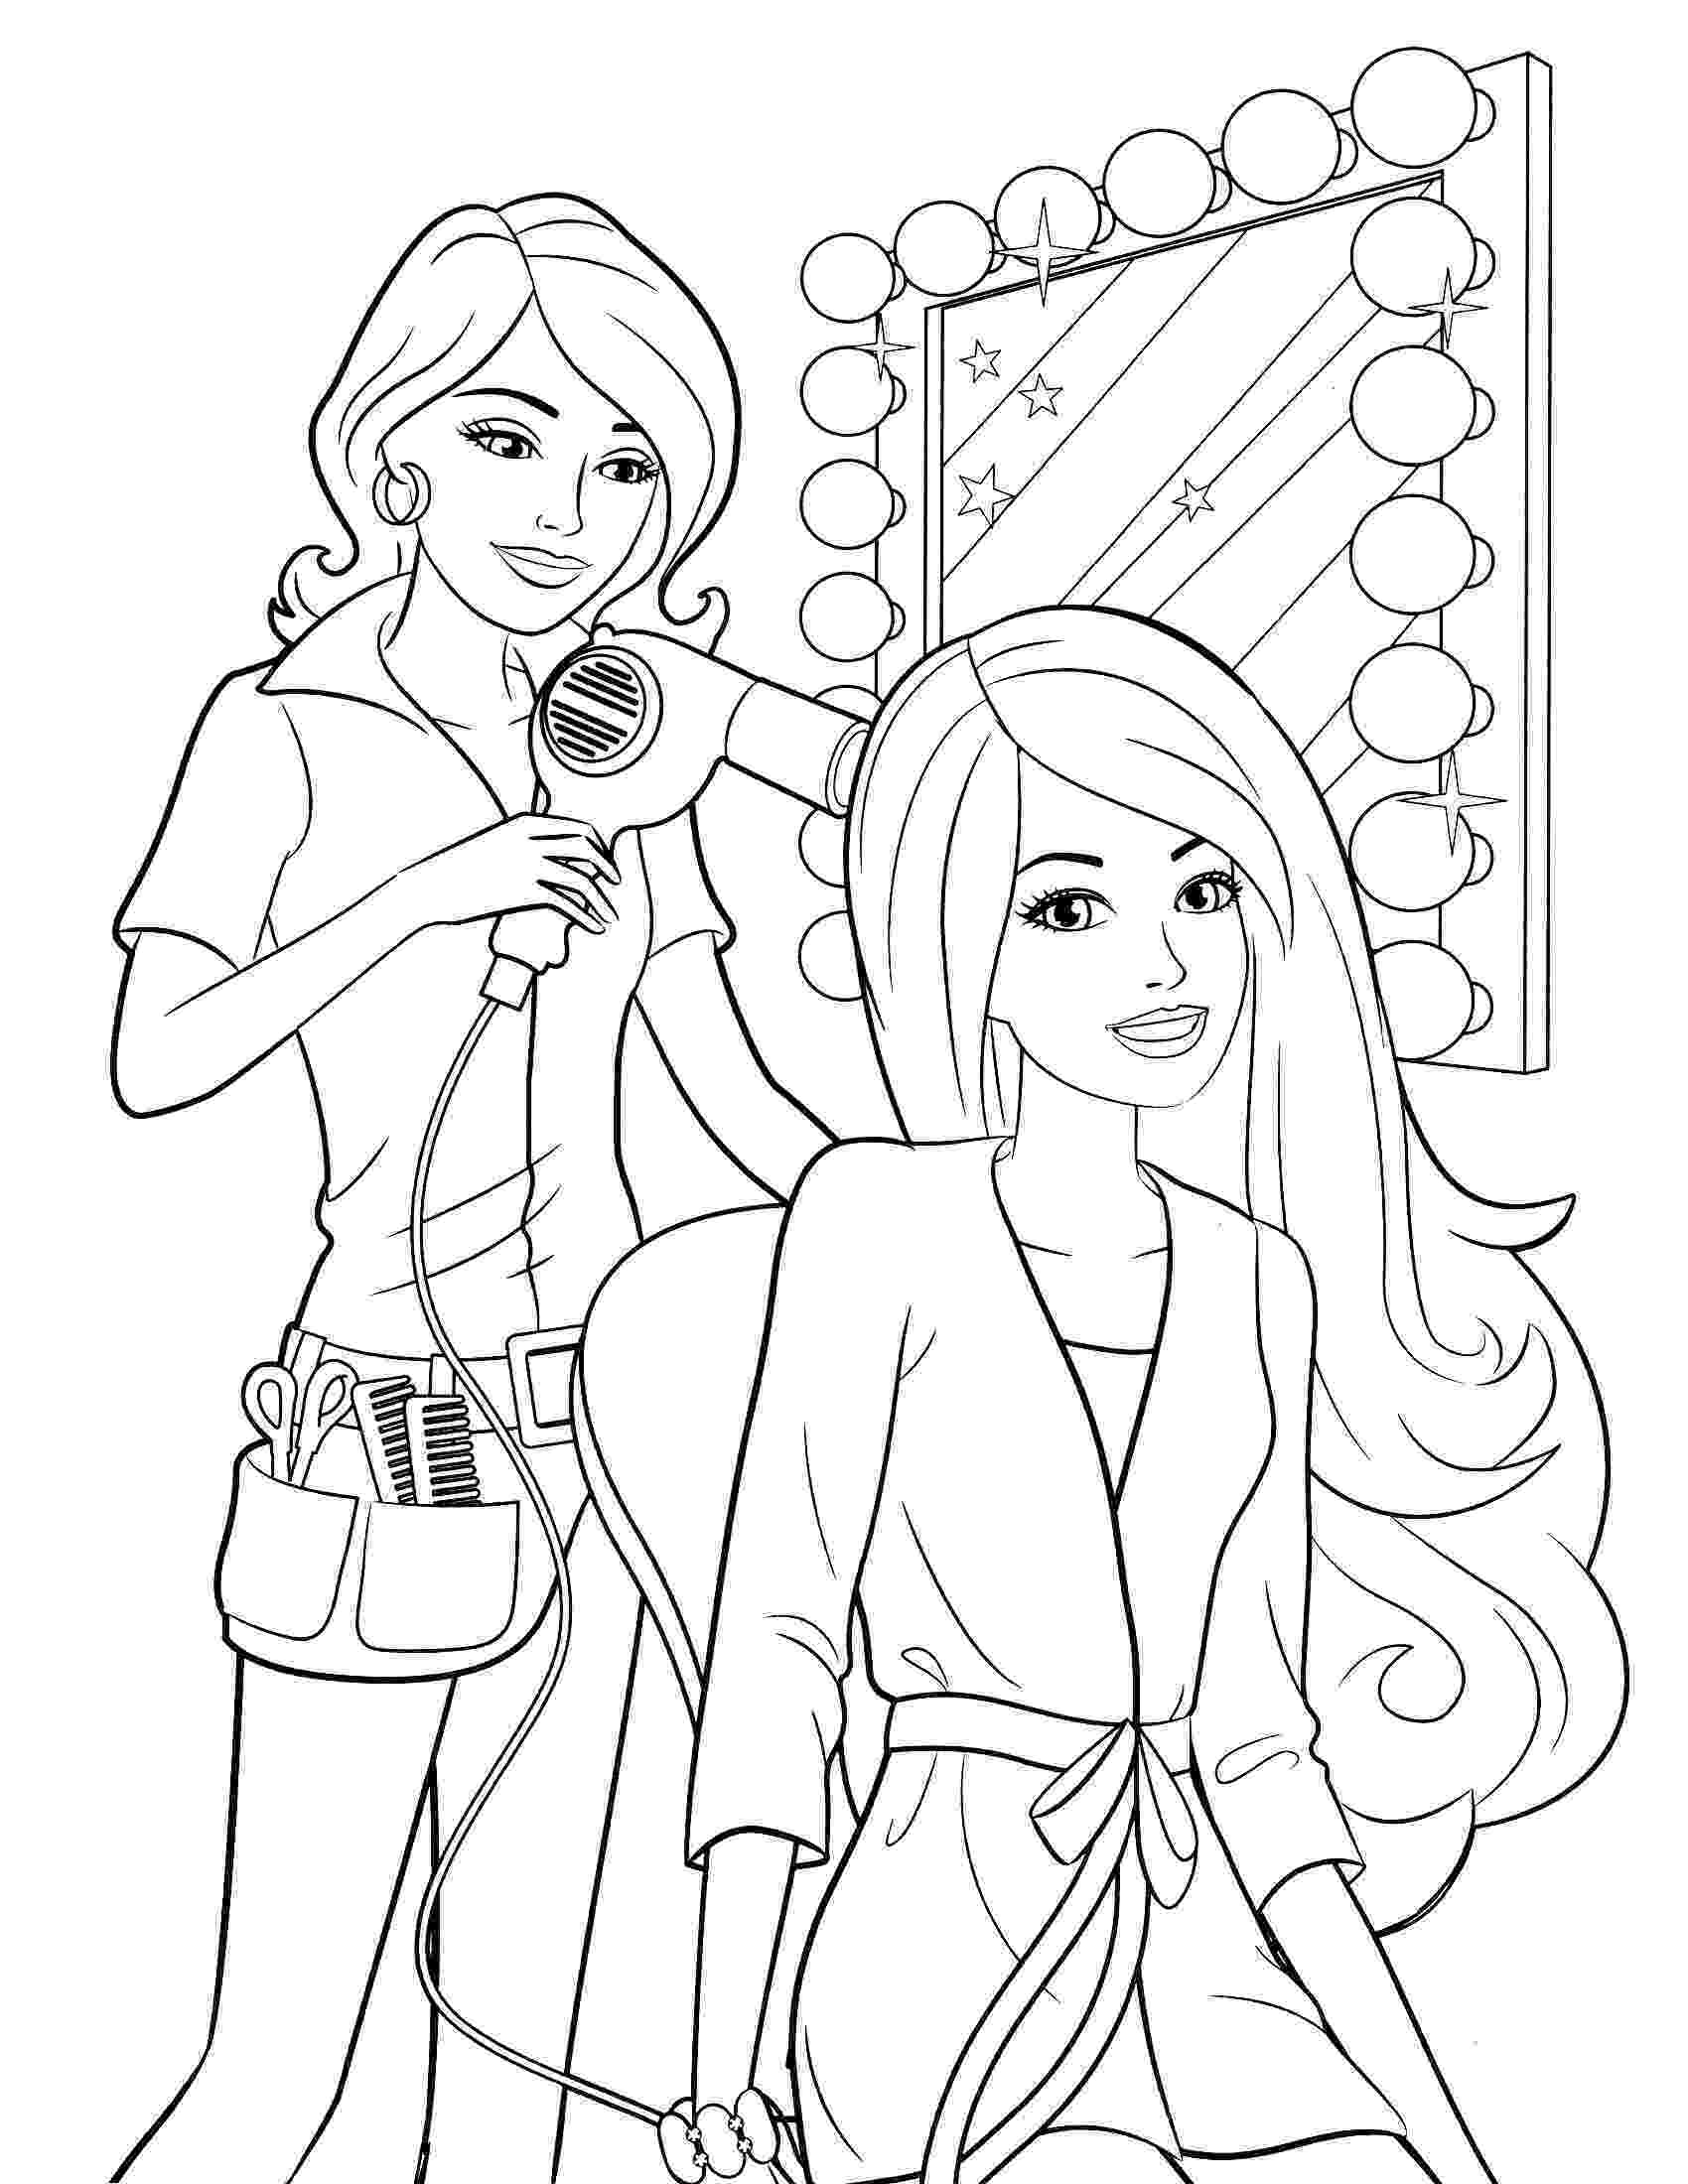 colouring pages to print for girls cute girl coloring pages to download and print for free girls print colouring for to pages 